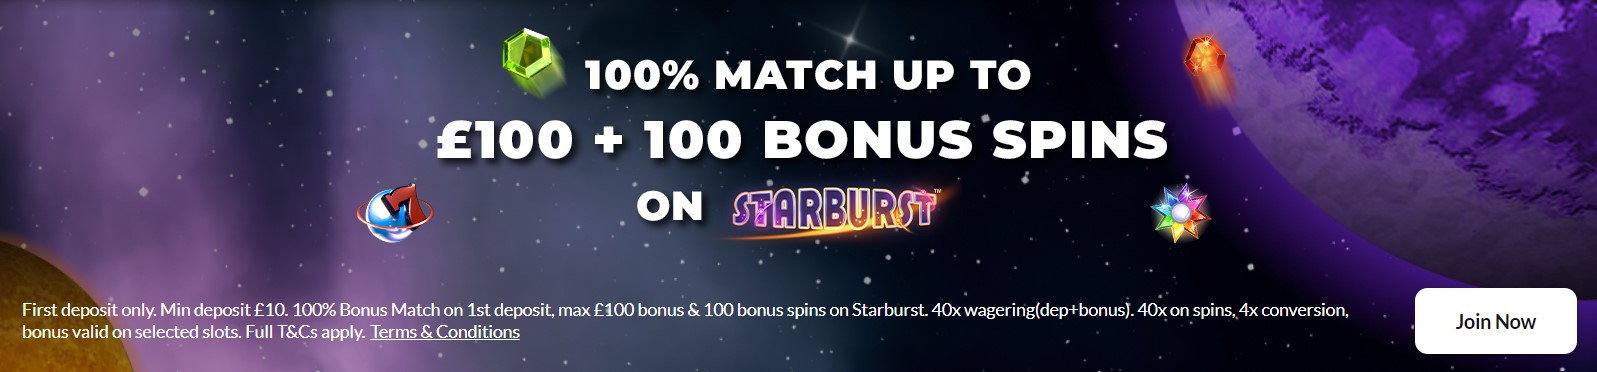 Cosmic Spins Casino Sign Up Offer